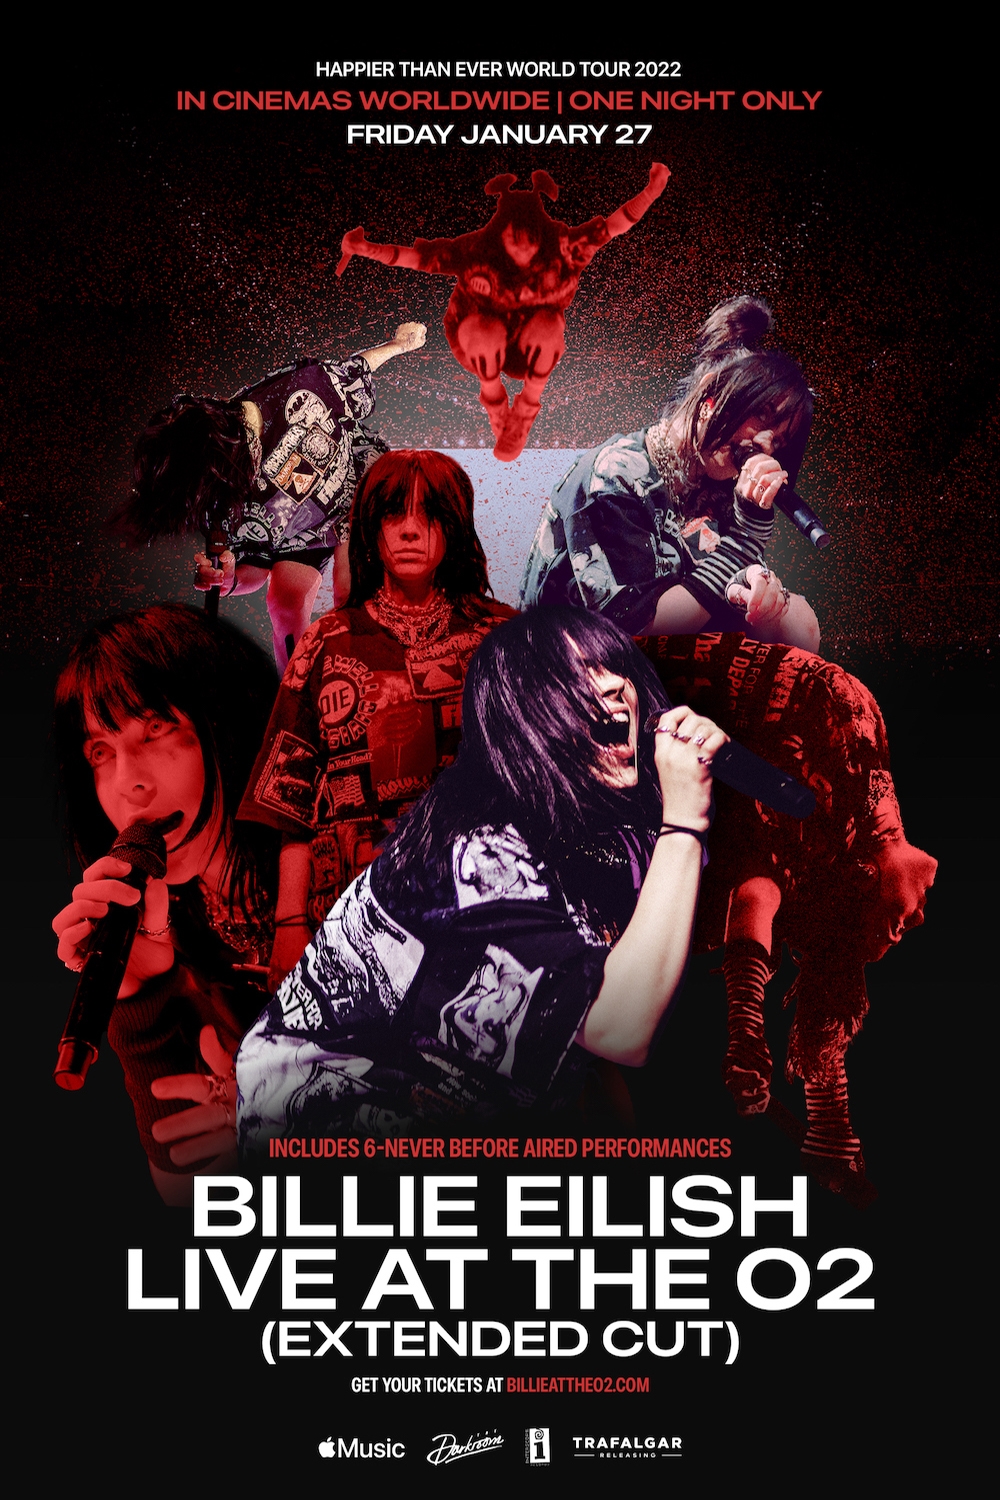 Billie Eilish: Live at the O2 (Extended Cut) Poster